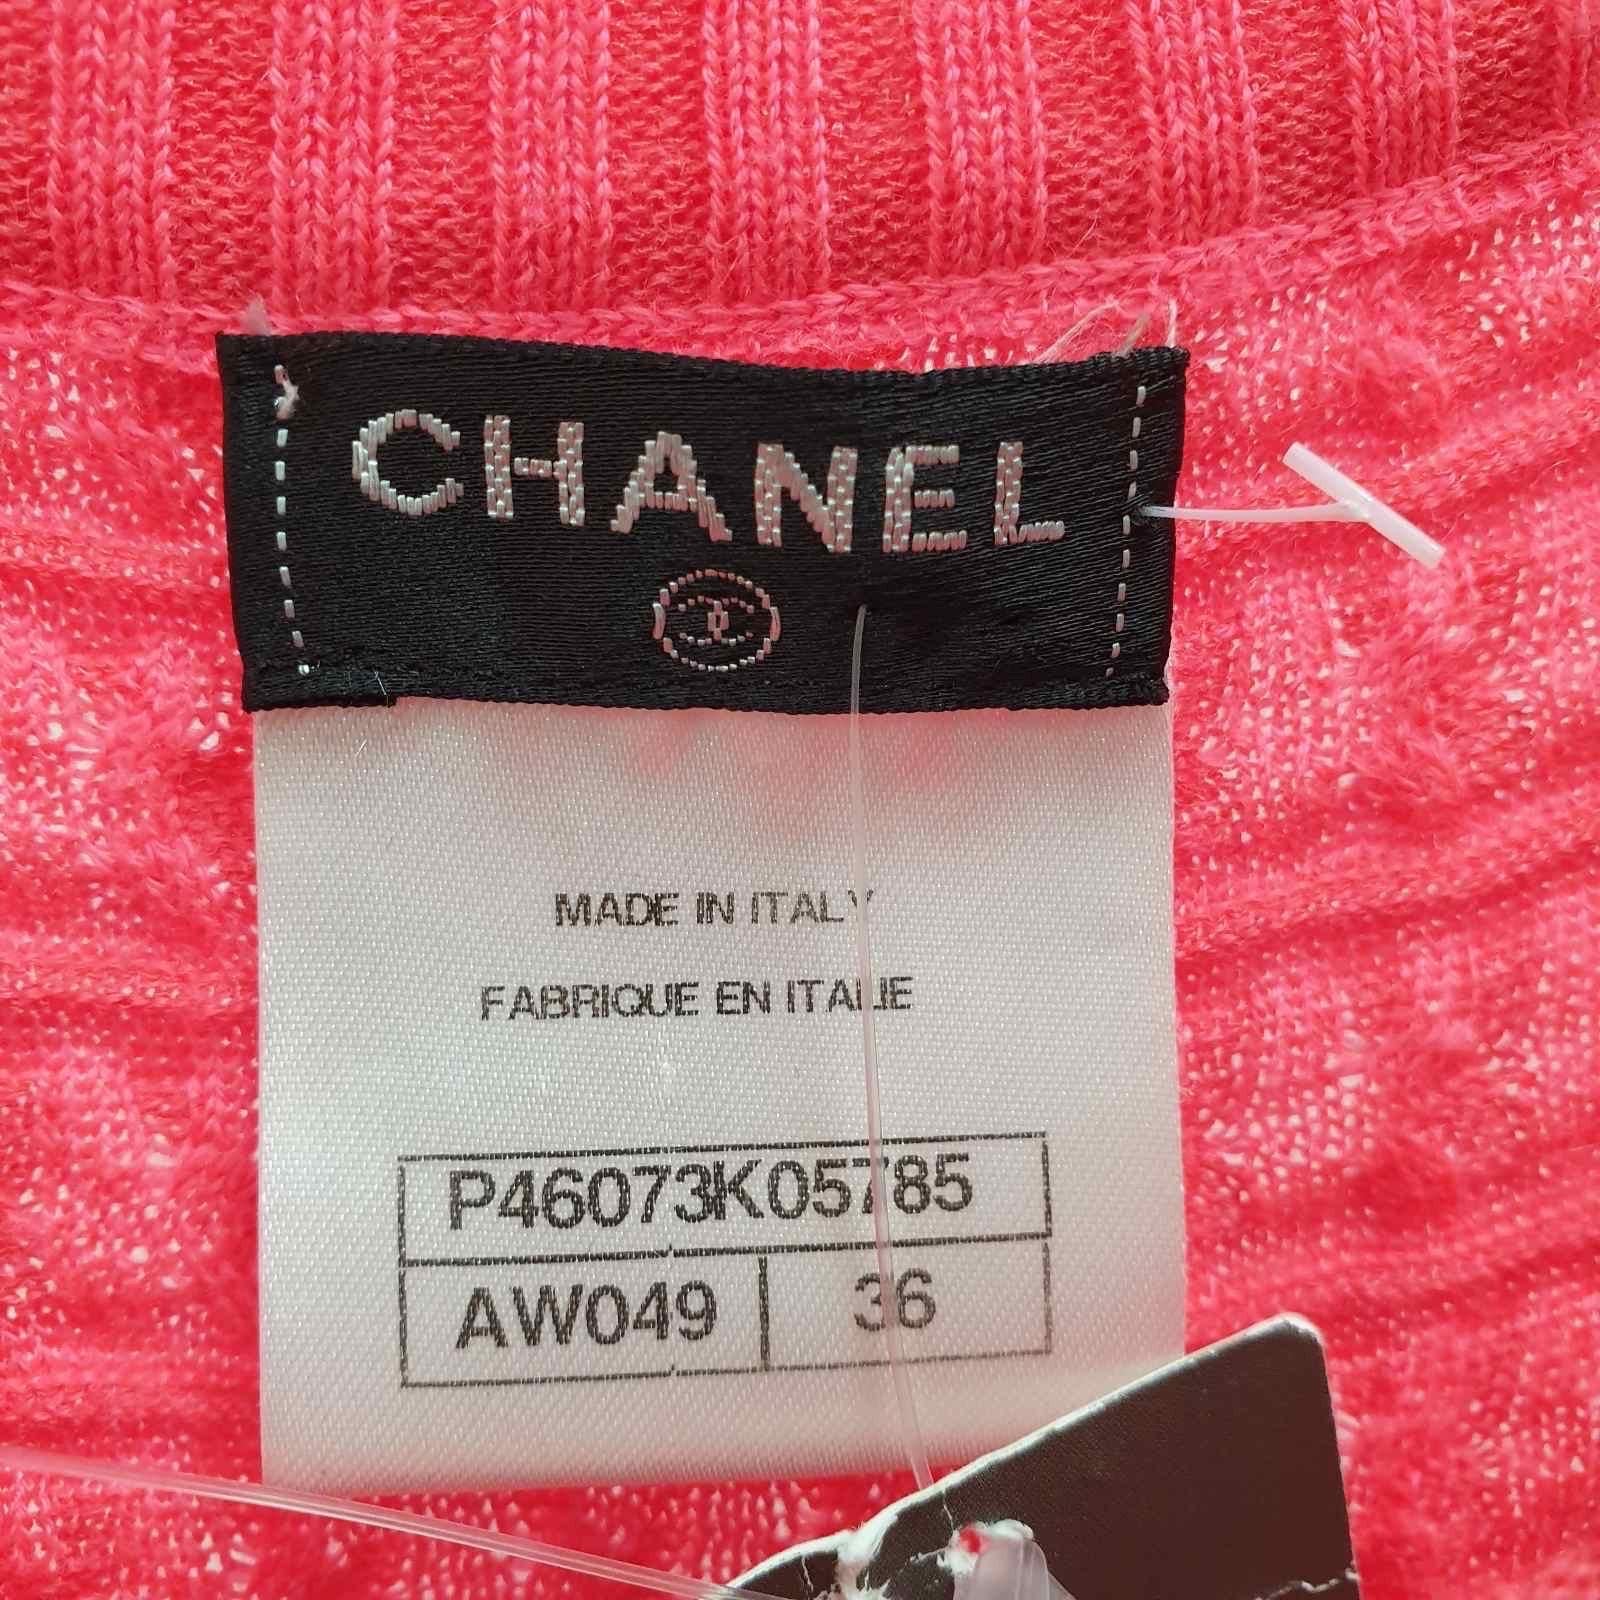 Chanel Pink Textured Knit Dress  In Excellent Condition For Sale In Krakow, PL